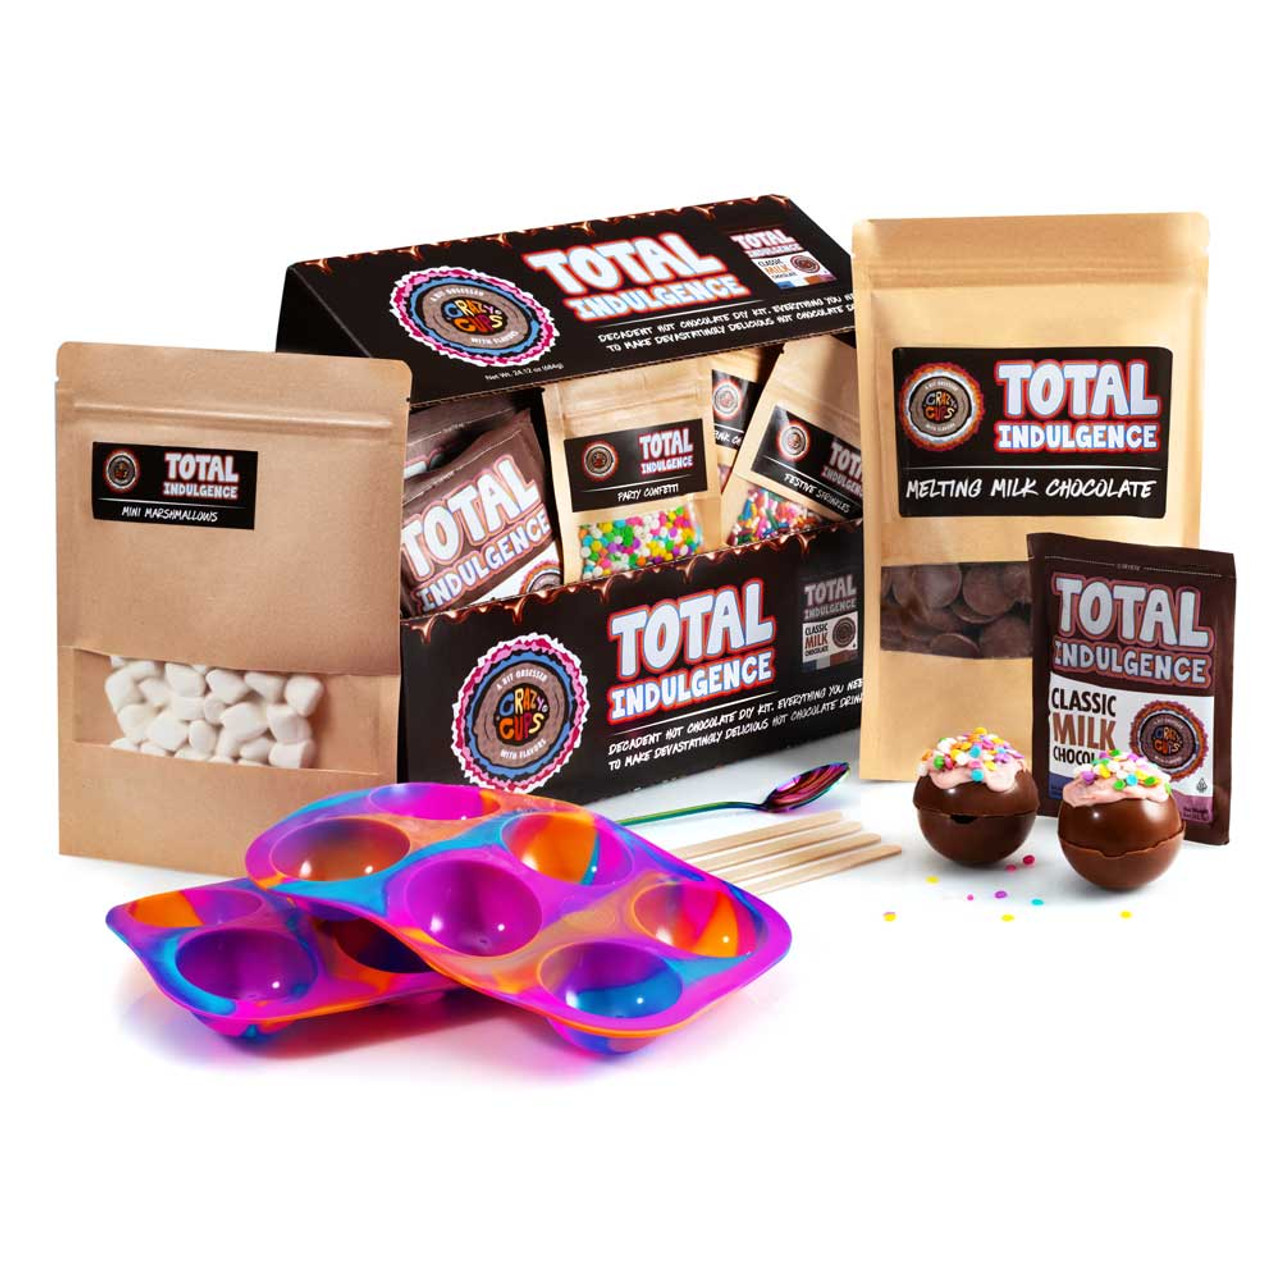 Limited Edition Hot Chocolate Bomb DIY Kit - Makes 12 Bombs - Crazy Cups